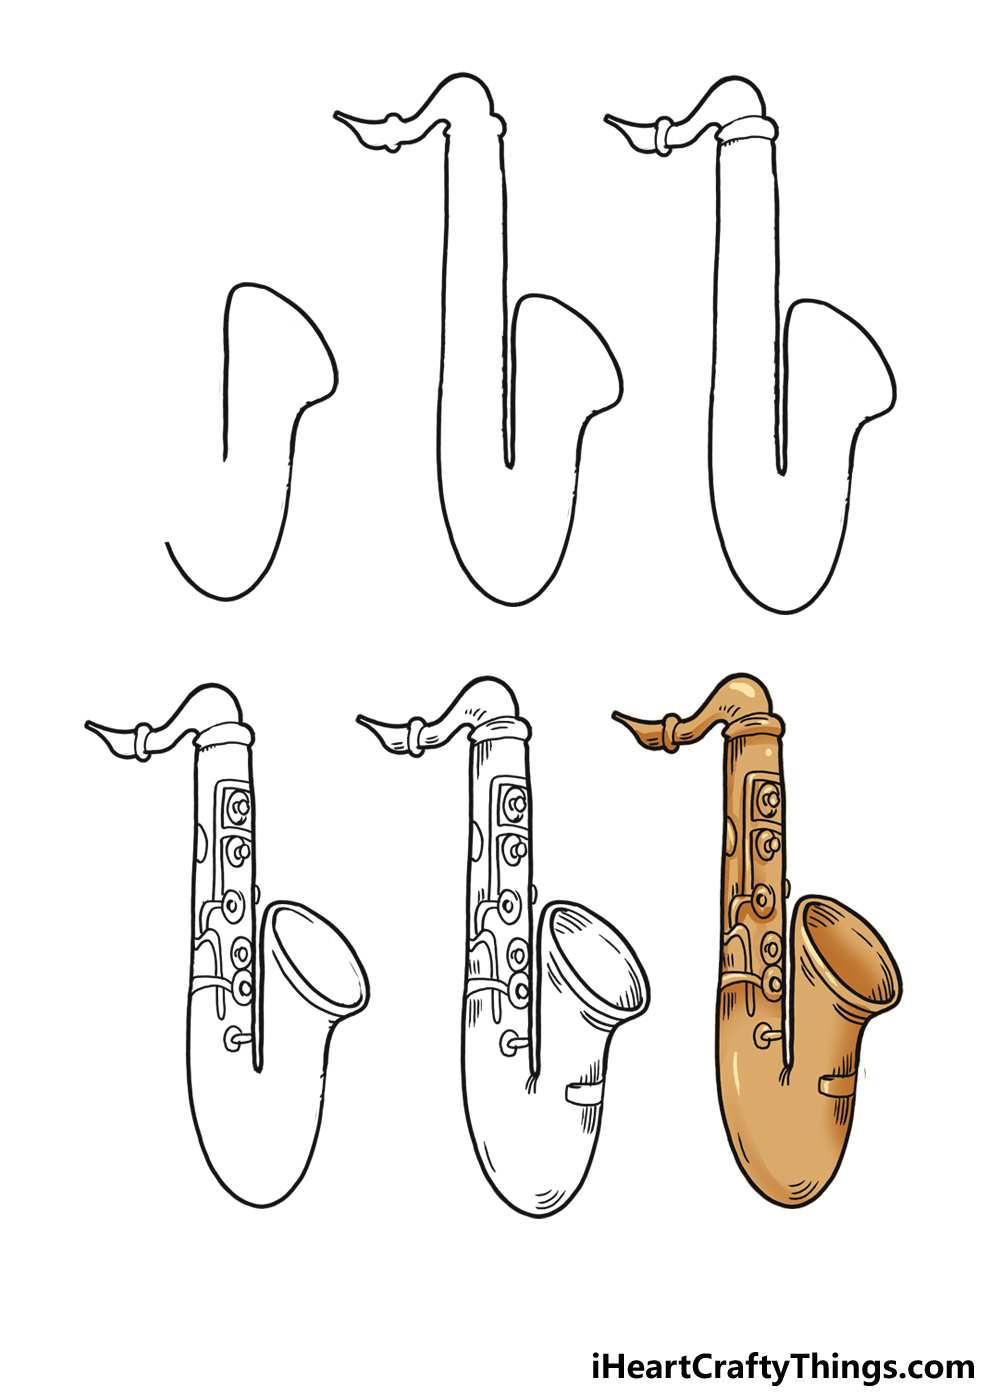 How to Draw A Saxophone